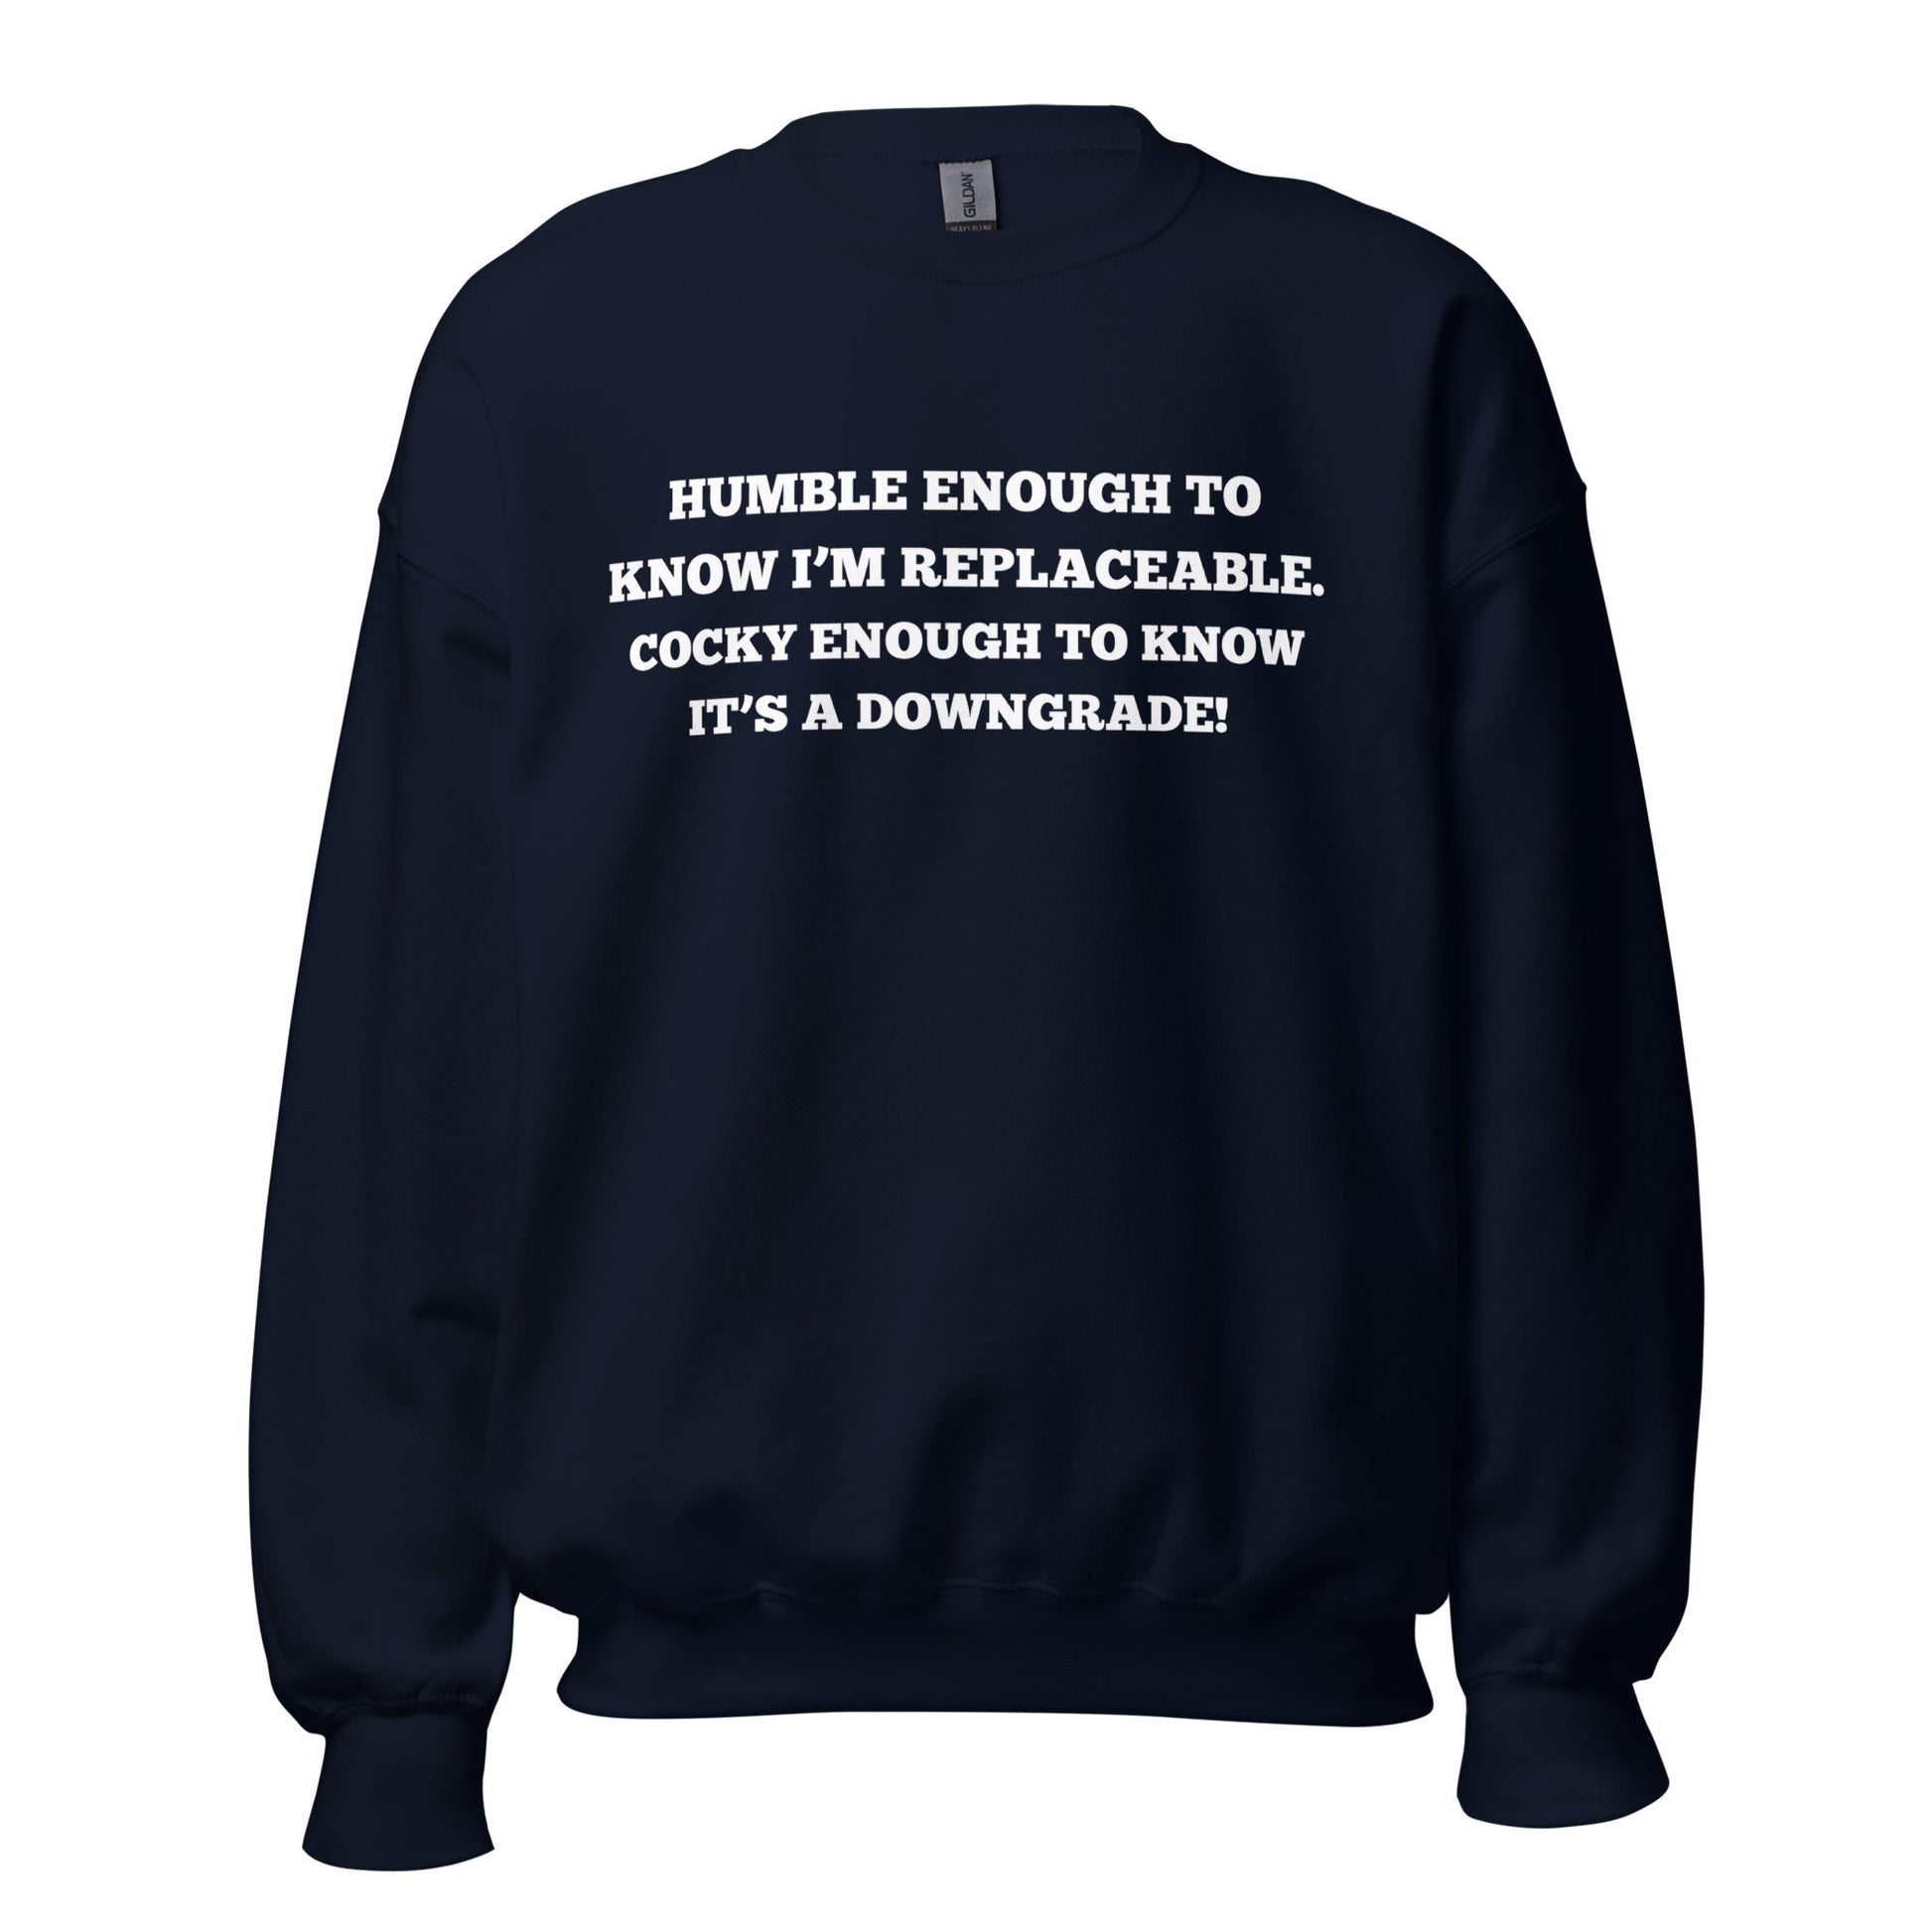 Humble Enough To Know Unisex Sweatshirt - Catch This Tea Shirt